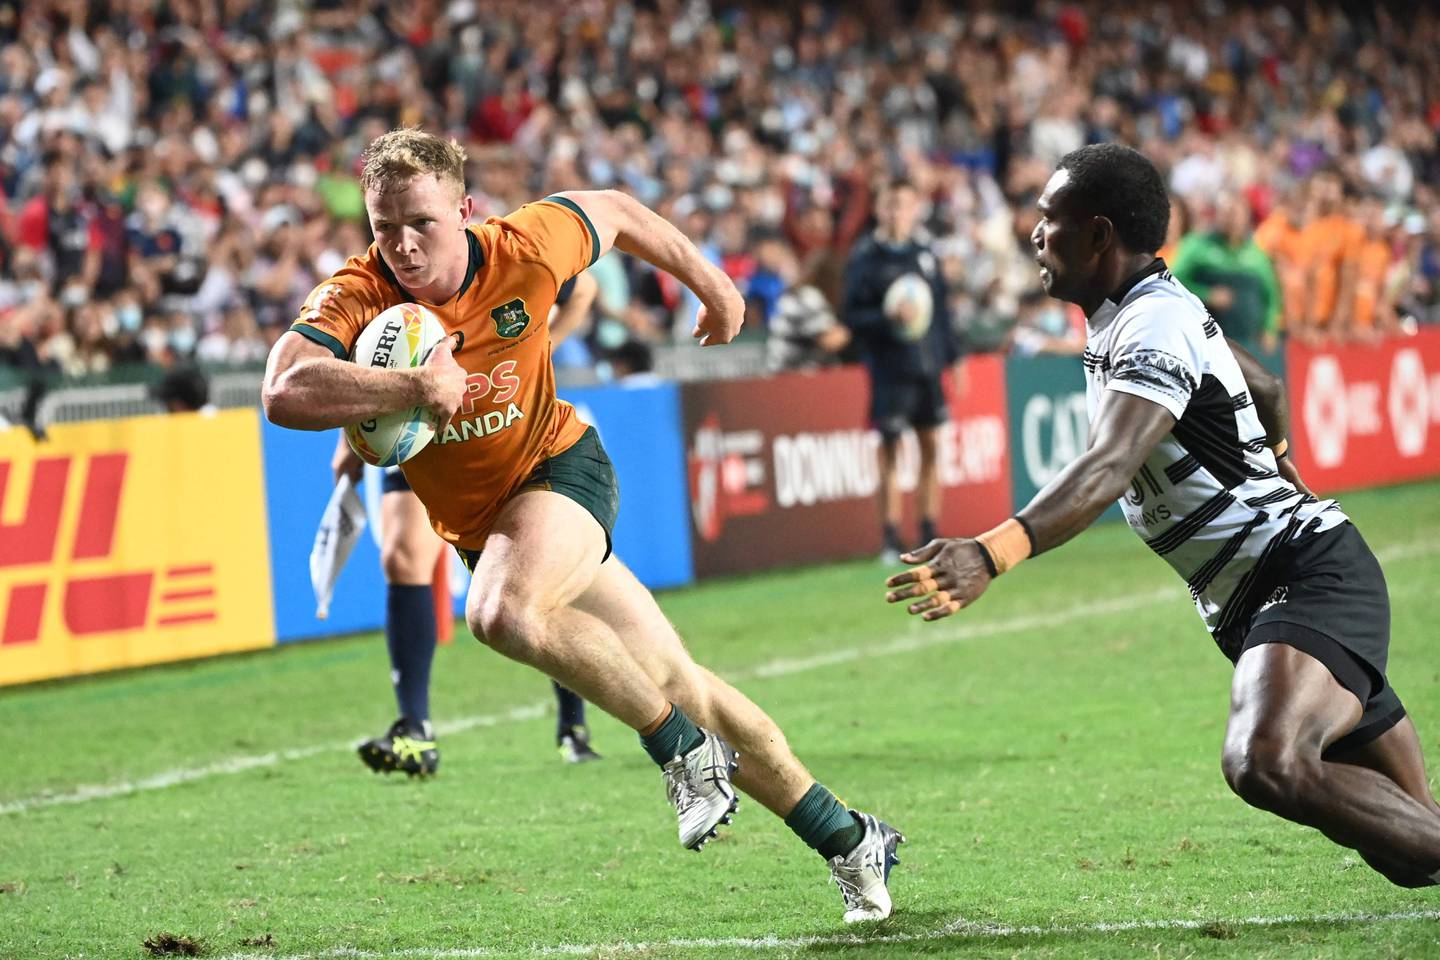 Australia’s Henry Hutchison, left, heads for a try as Fiji’s Josevani Soro attempts a tackle in the Hong Kong Sevens men's final on November 6, 2022. AFP